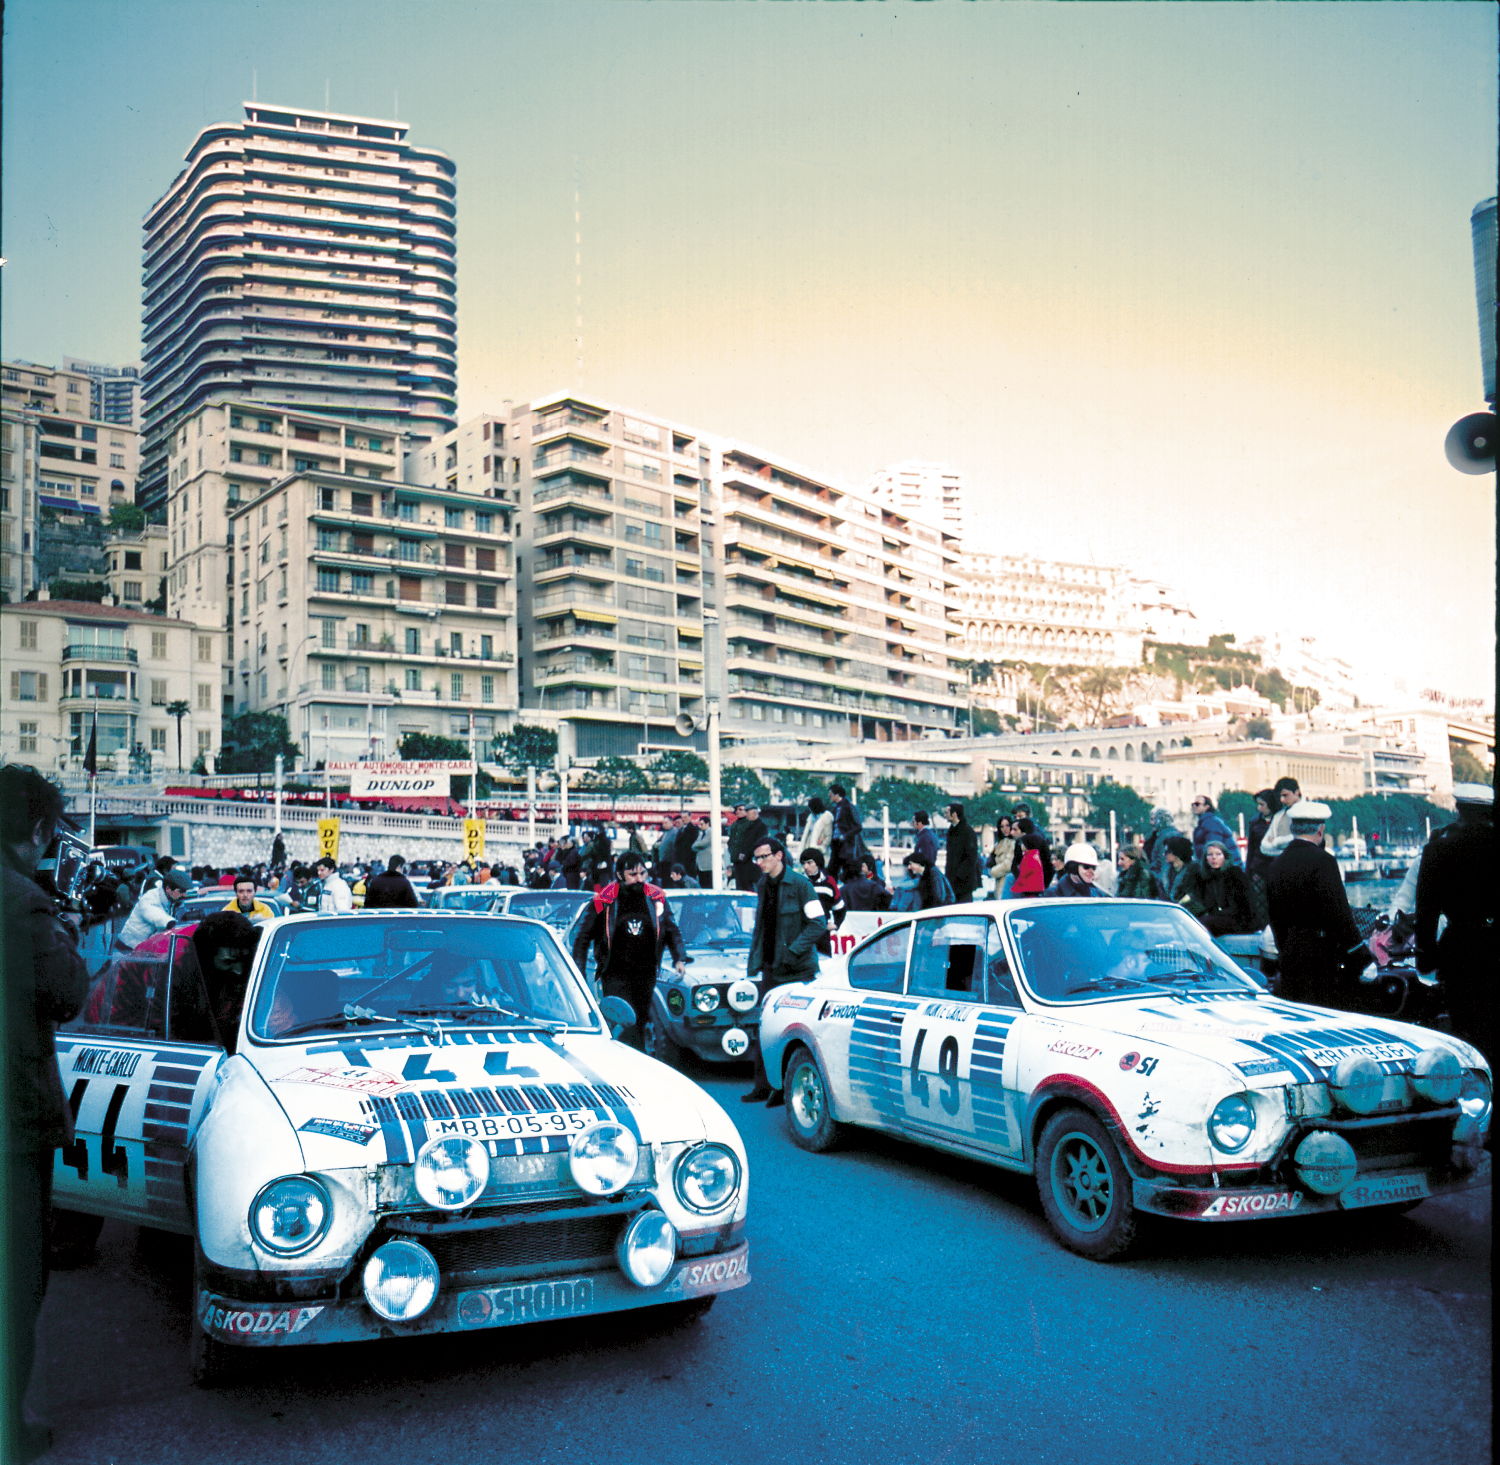 The ‘Porsche of the East' won the 1,300 cm3 class with the duo Václav Blahna / Lubislav Hlávka at the Monte Carlo Rally in 1977. A ŠKODA 130 RS can be seen alongside other representatives of ŠKODA’s racing history at the classic-car event in Essen.